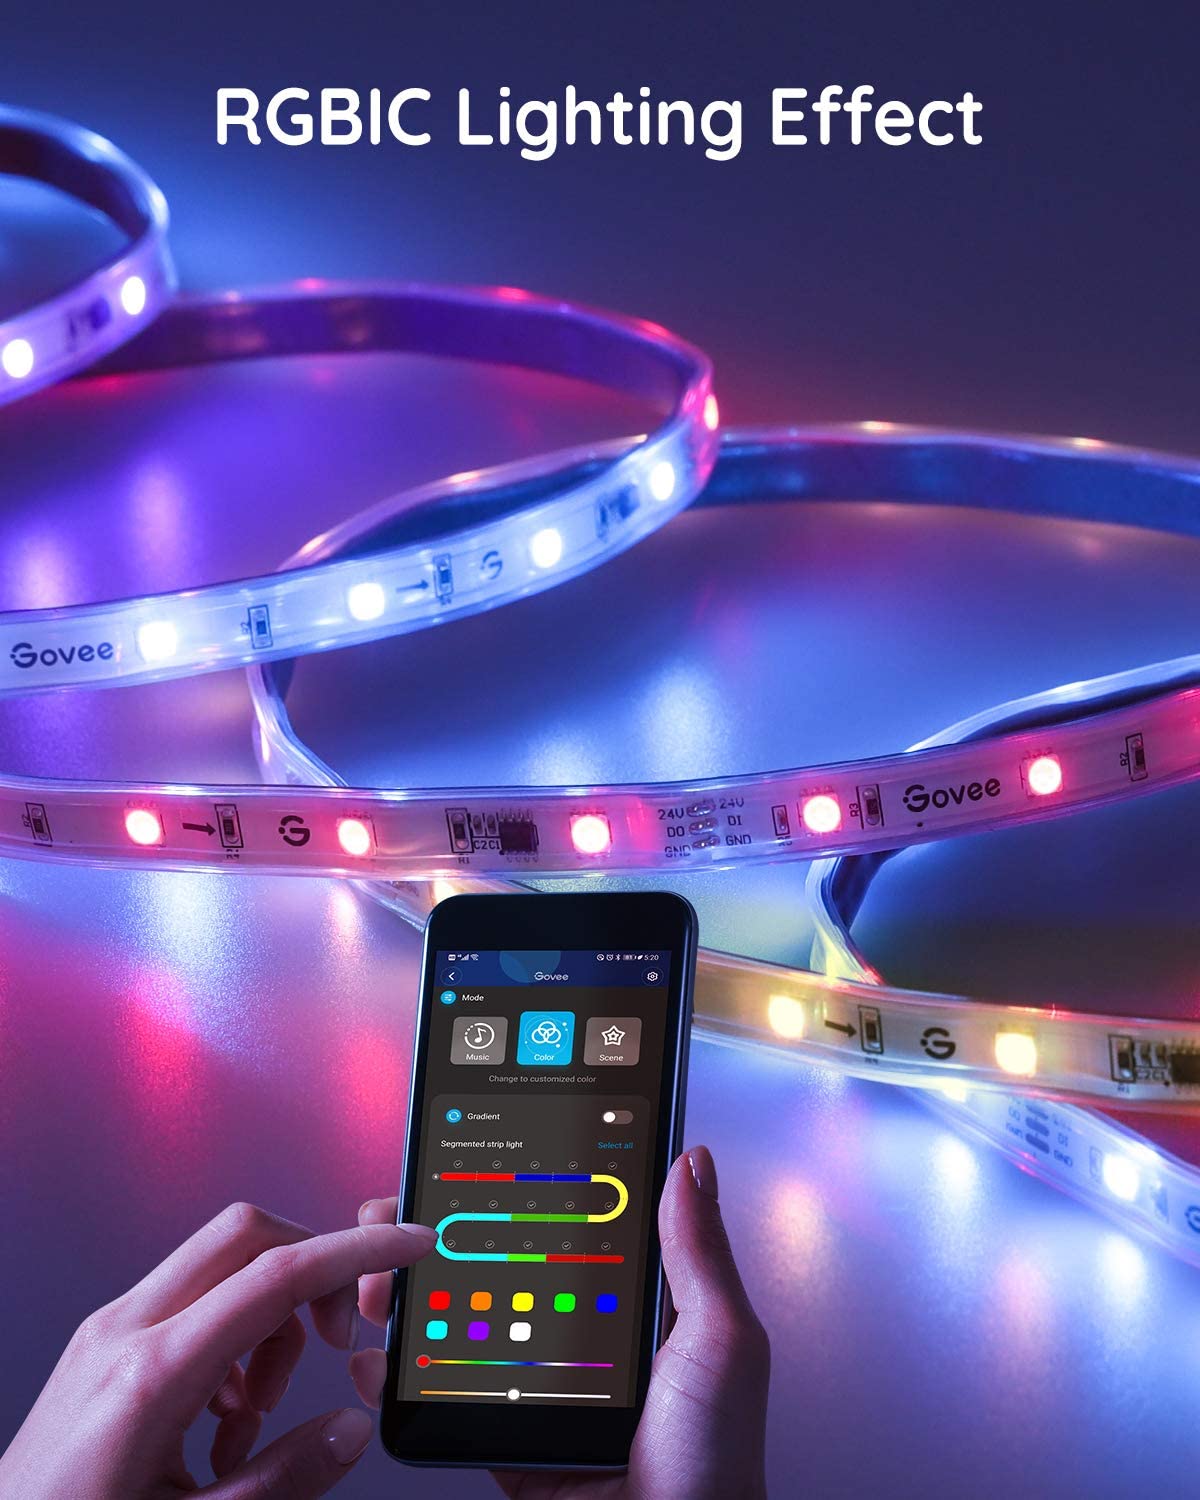 Govee smart LED lights and meat thermometers are holiday-prep must